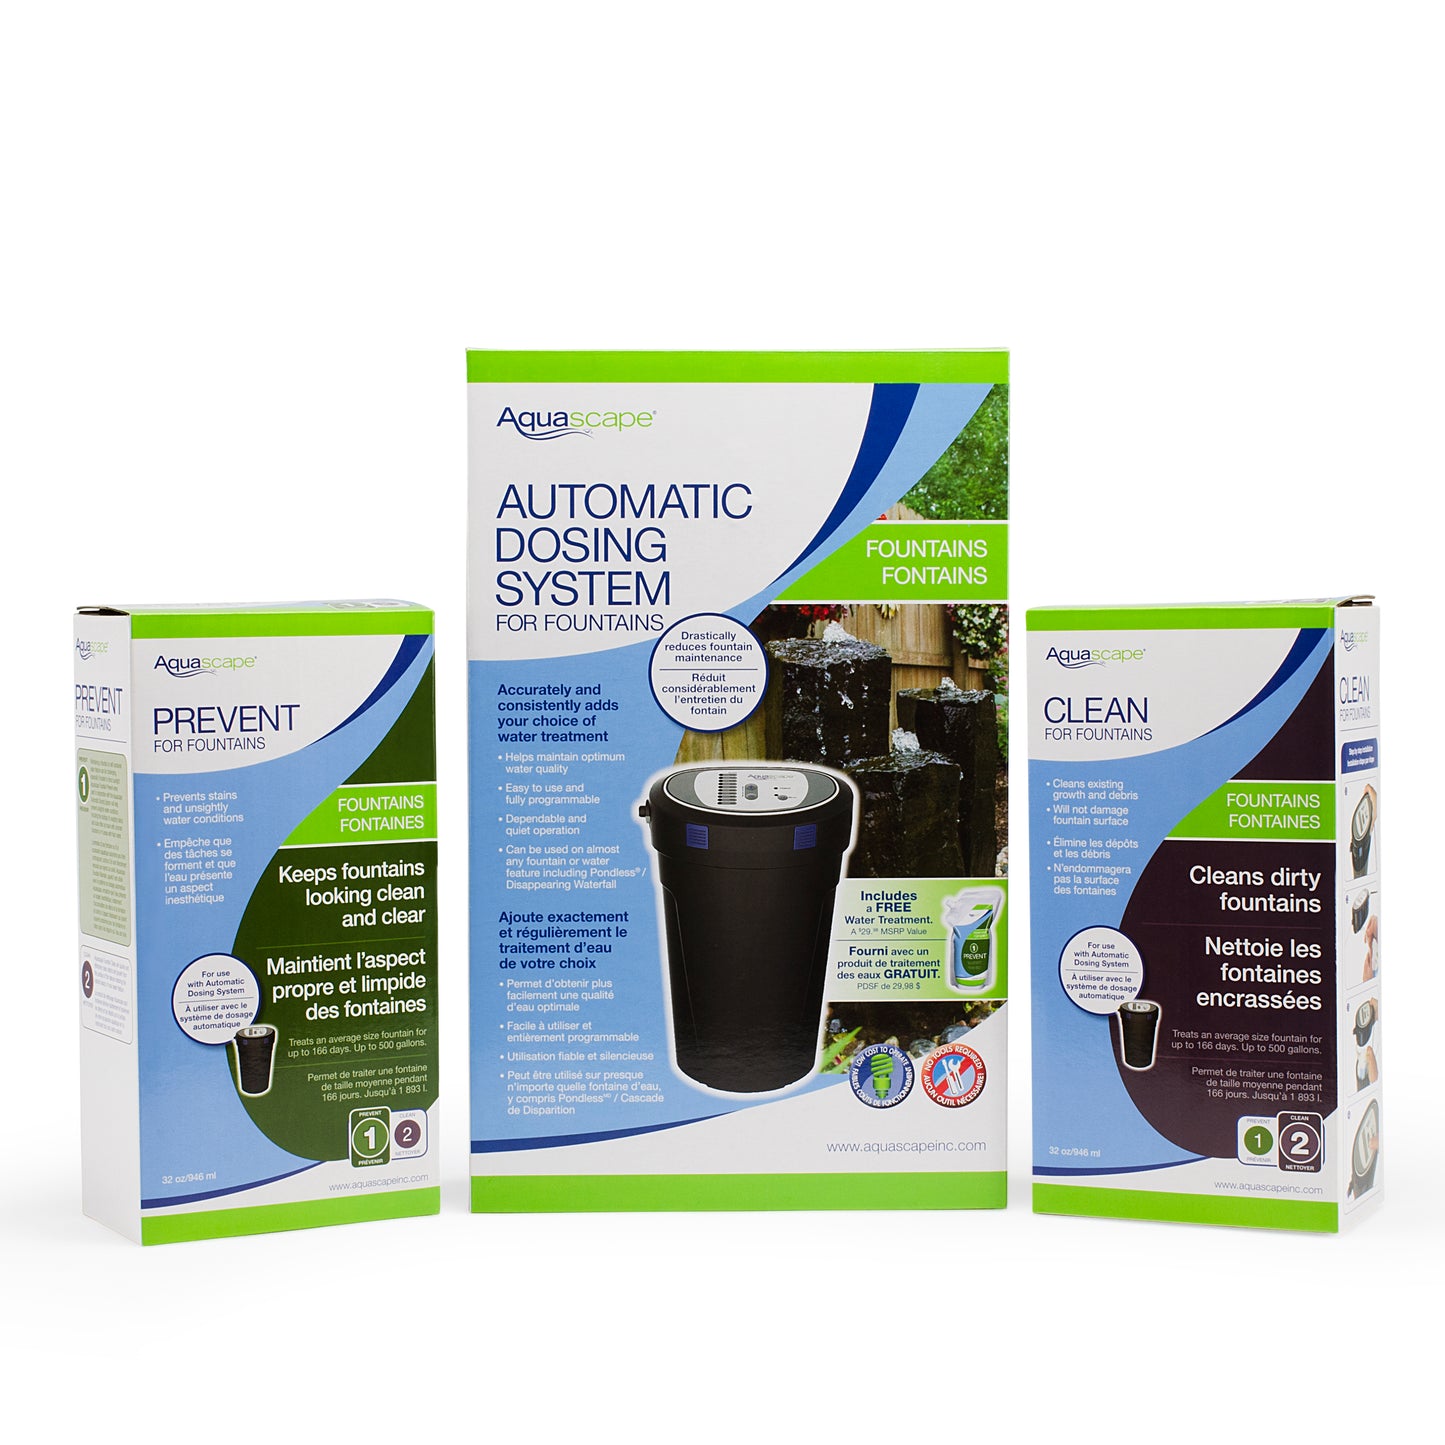 AUTOMATIC DOSING SYSTEM “FOR FOUNTAINS” - UK - WaterFeature.Shop